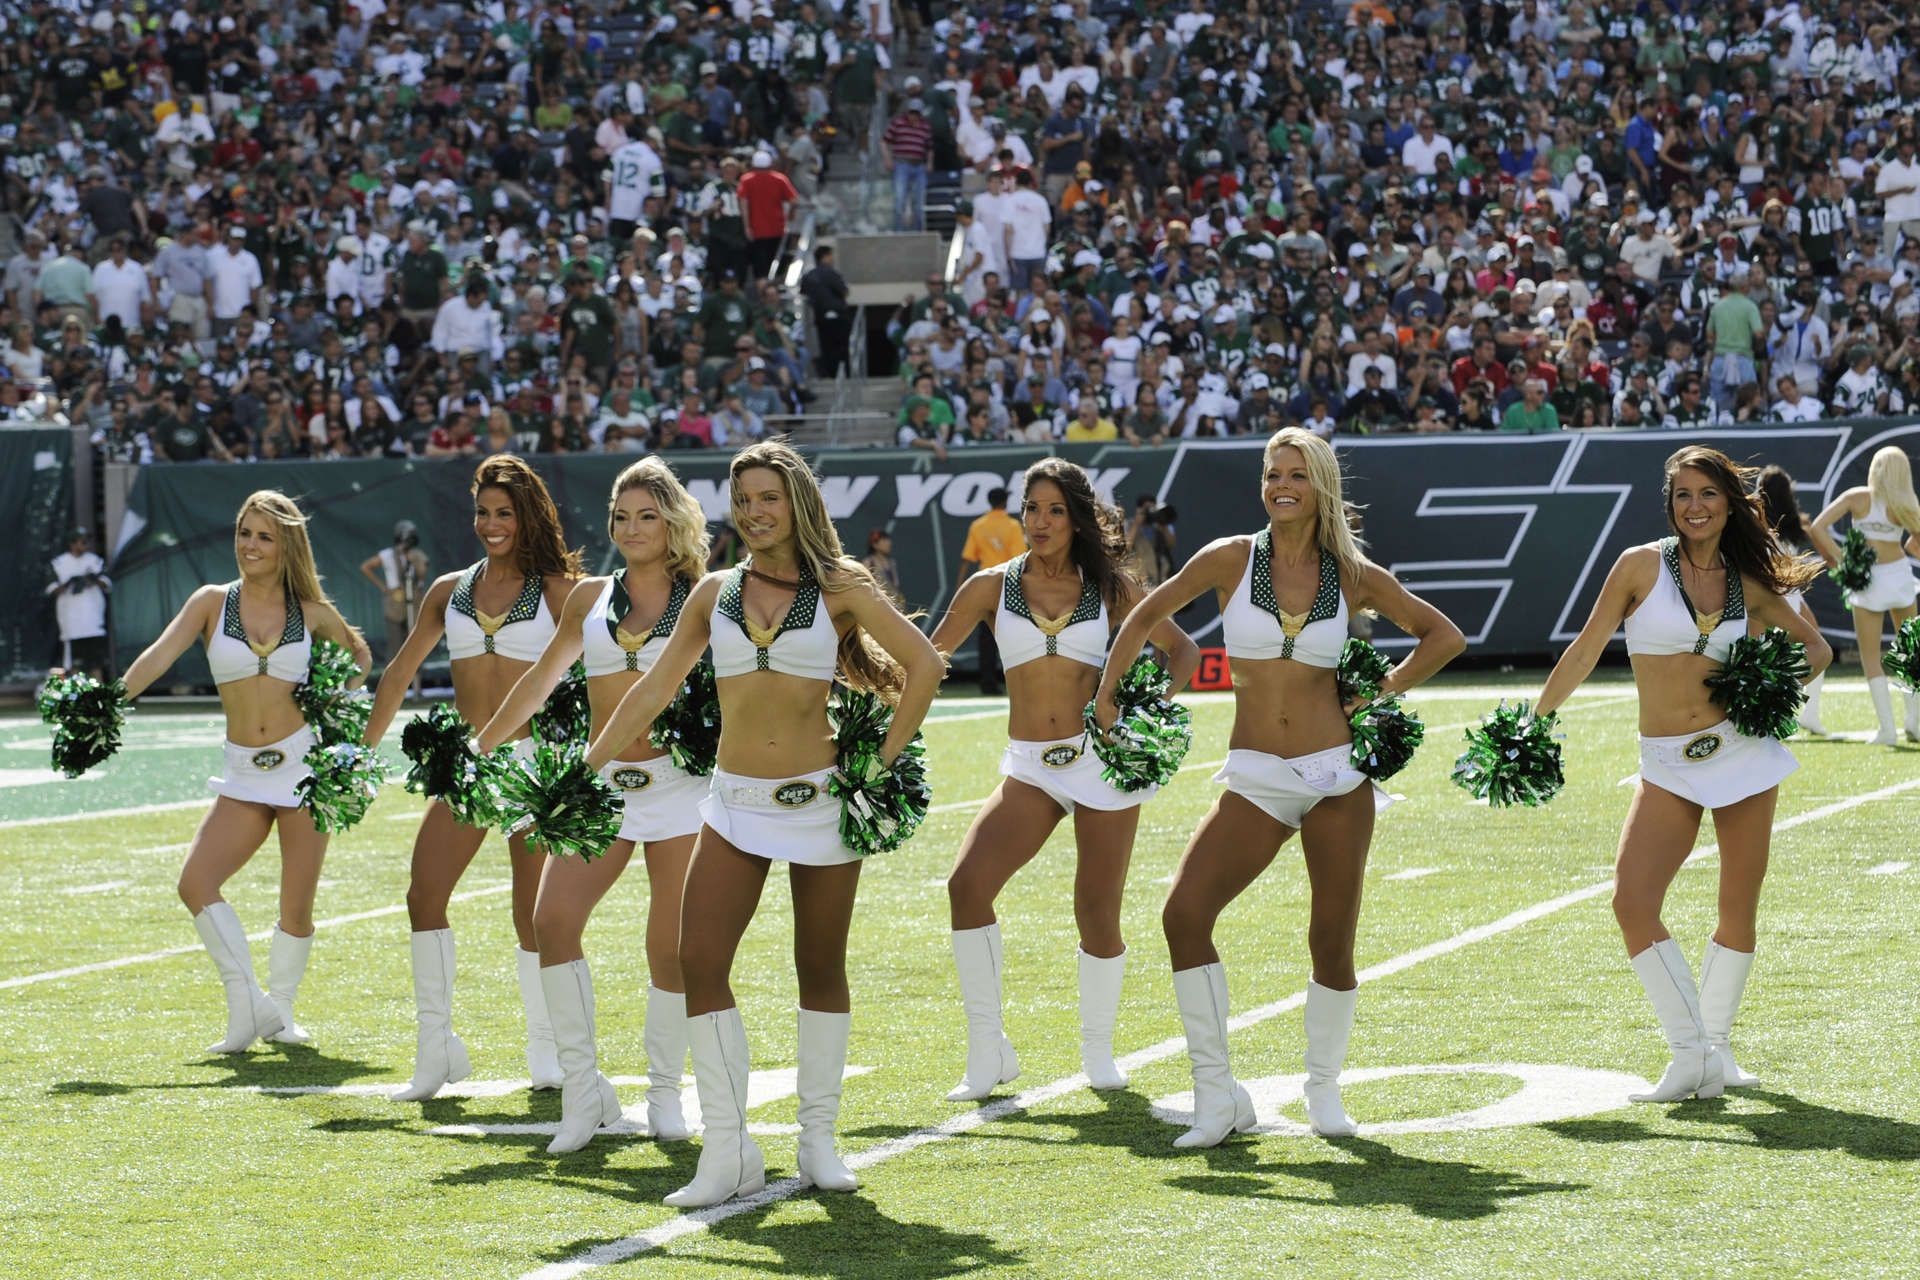 1920x1280 Download New York Jets Cheerleader Roster 2013 in high quality wallpaper.  And You can find the best NFL wallpaper HD on related New York Jets  Cheerleader ...